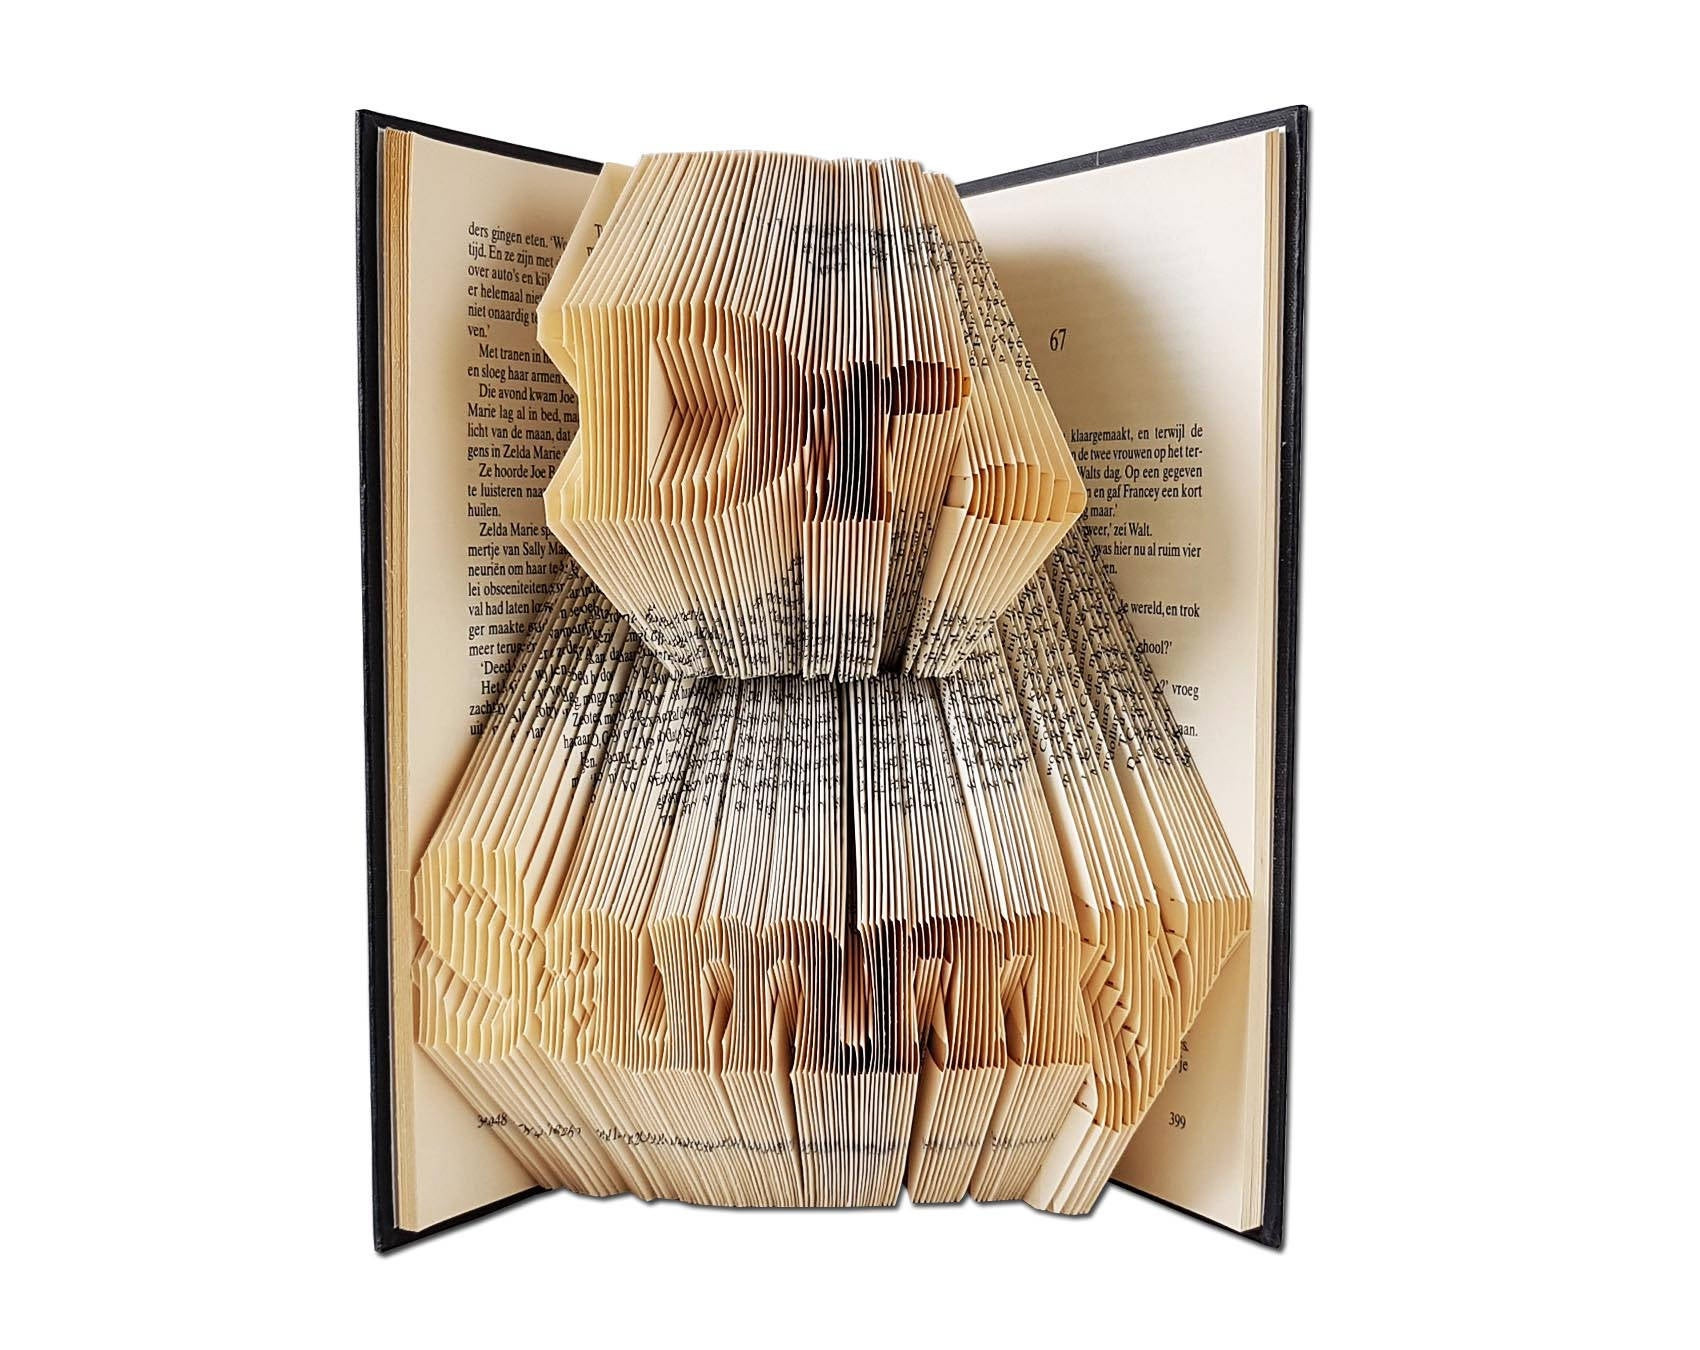 Phd Graduation Gift Ideas
 Gift for doctor PhD Gift PhD Graduation Gift Folded Book